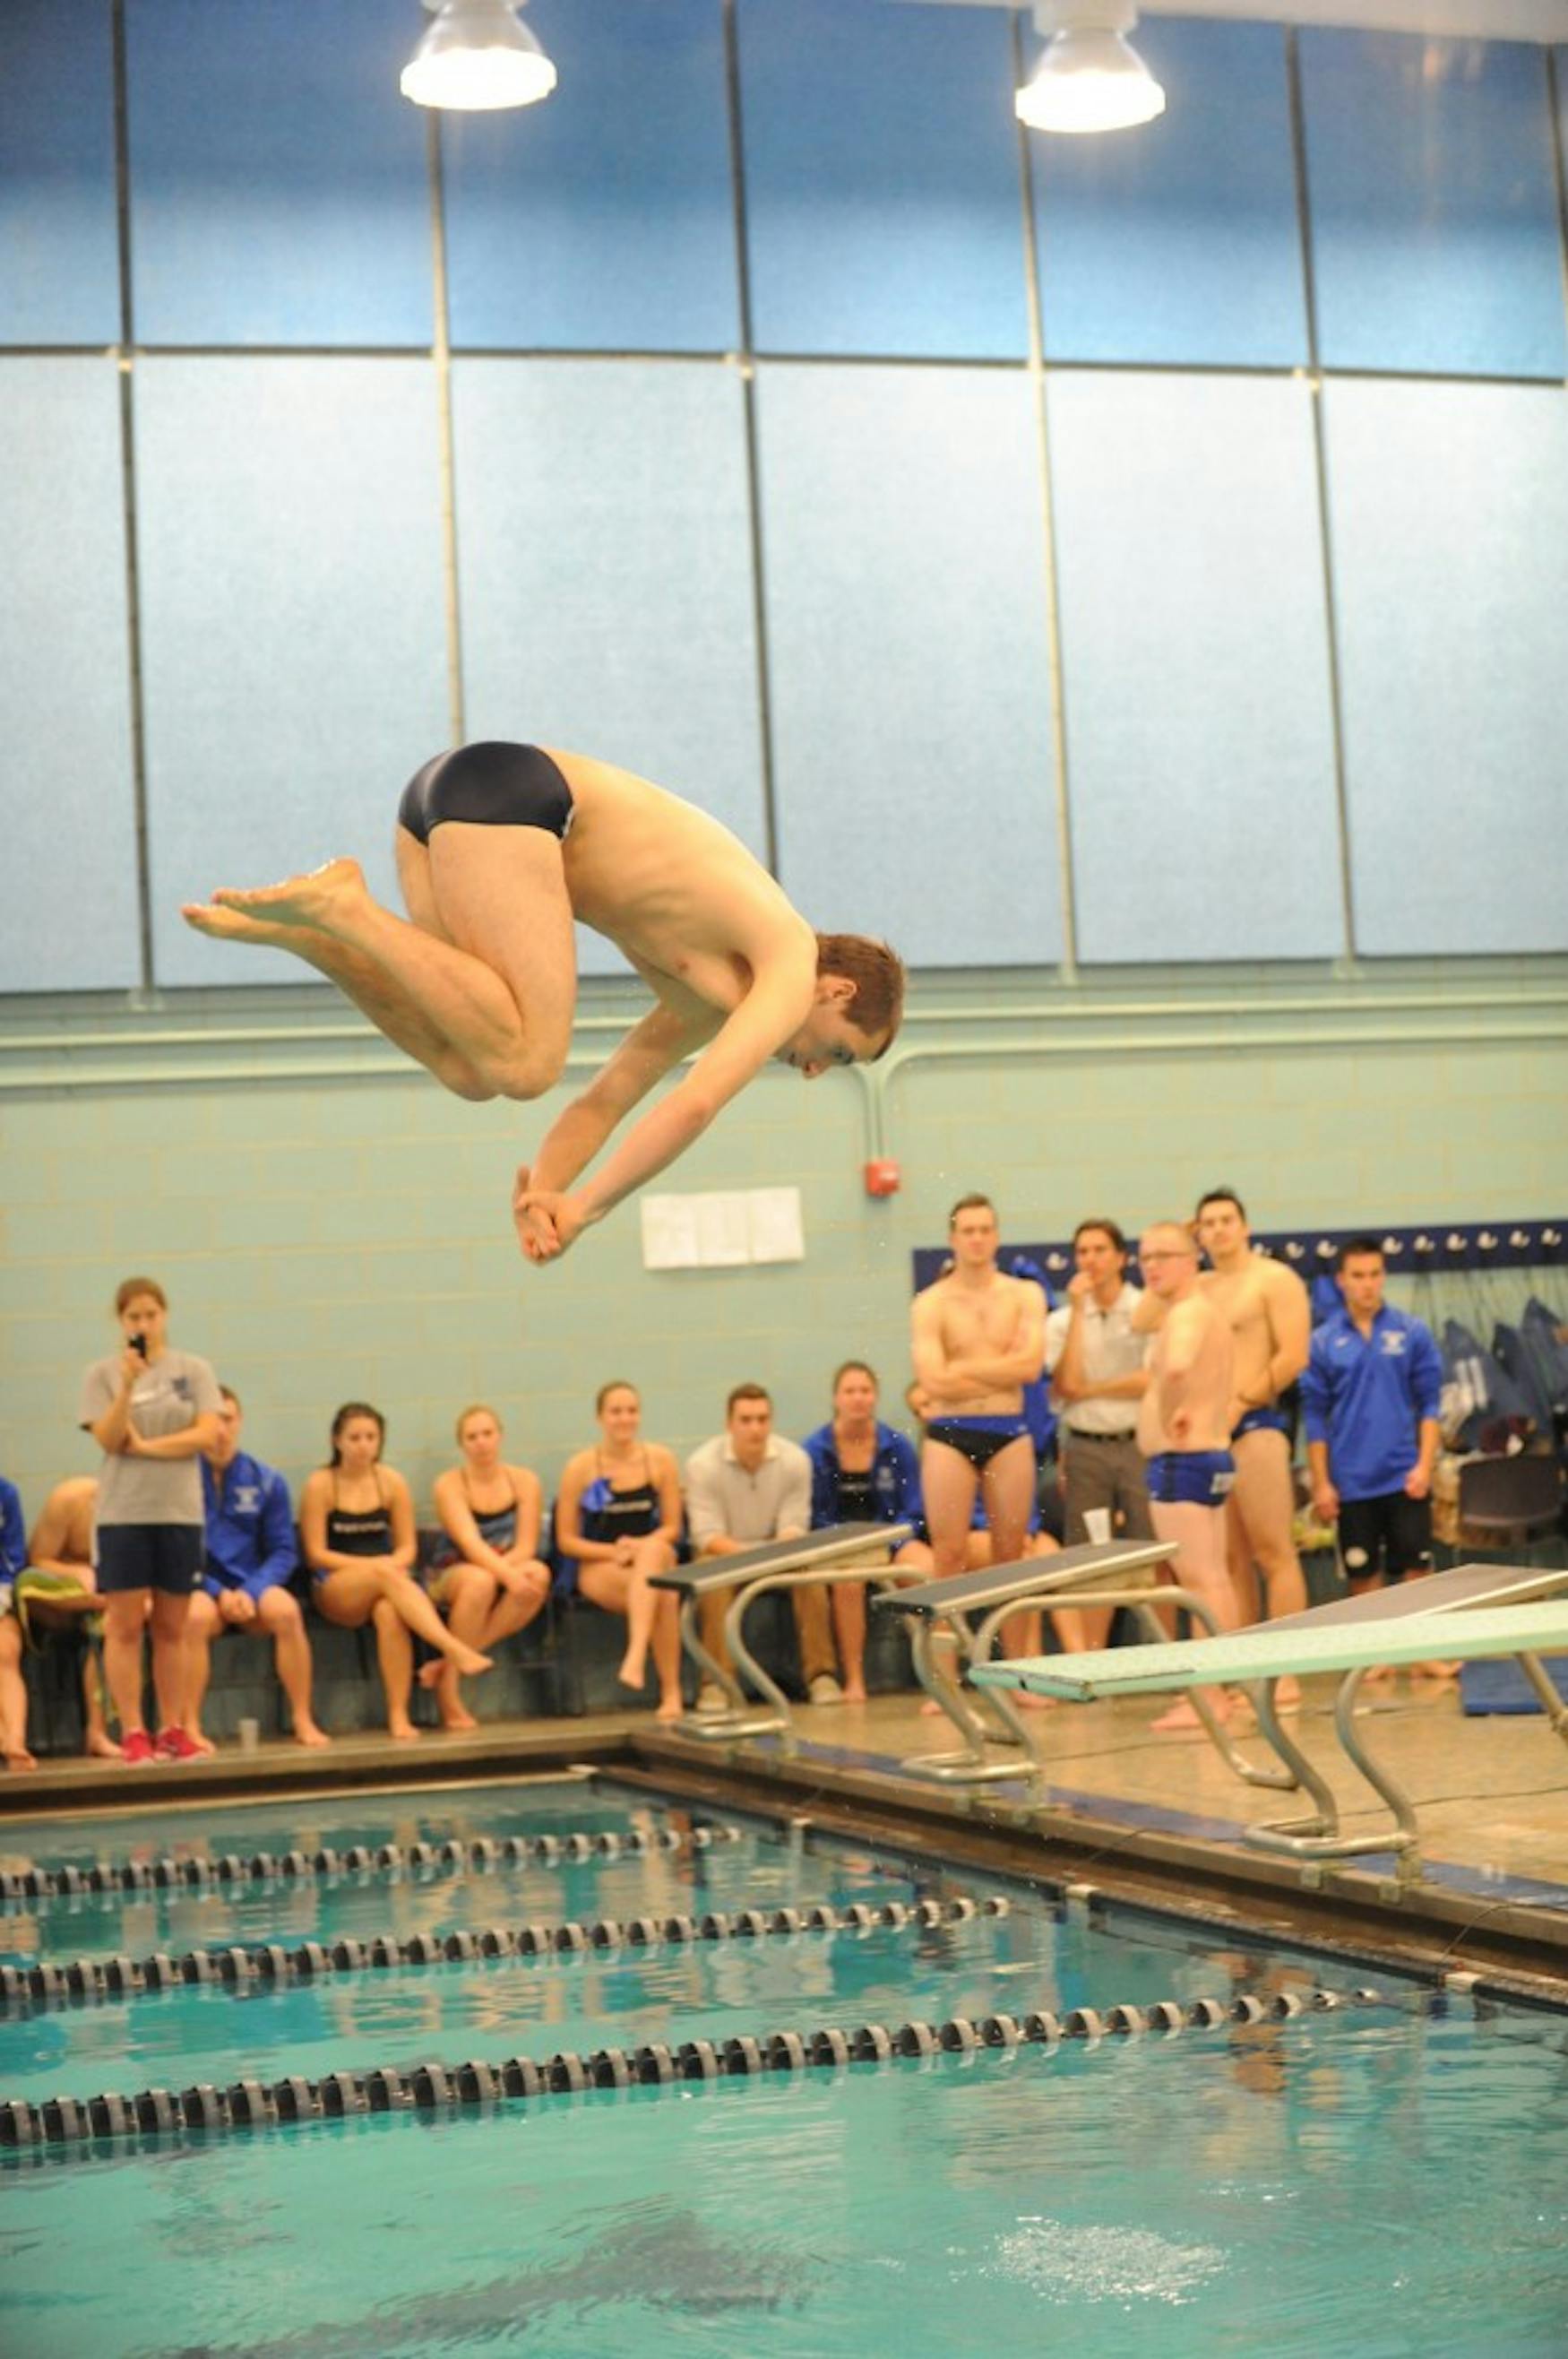 HEAD OVER HEELS: Sam Zucker ’18 curls into a dive during the Judges’ home meet versus Wheaton College on Saturday.